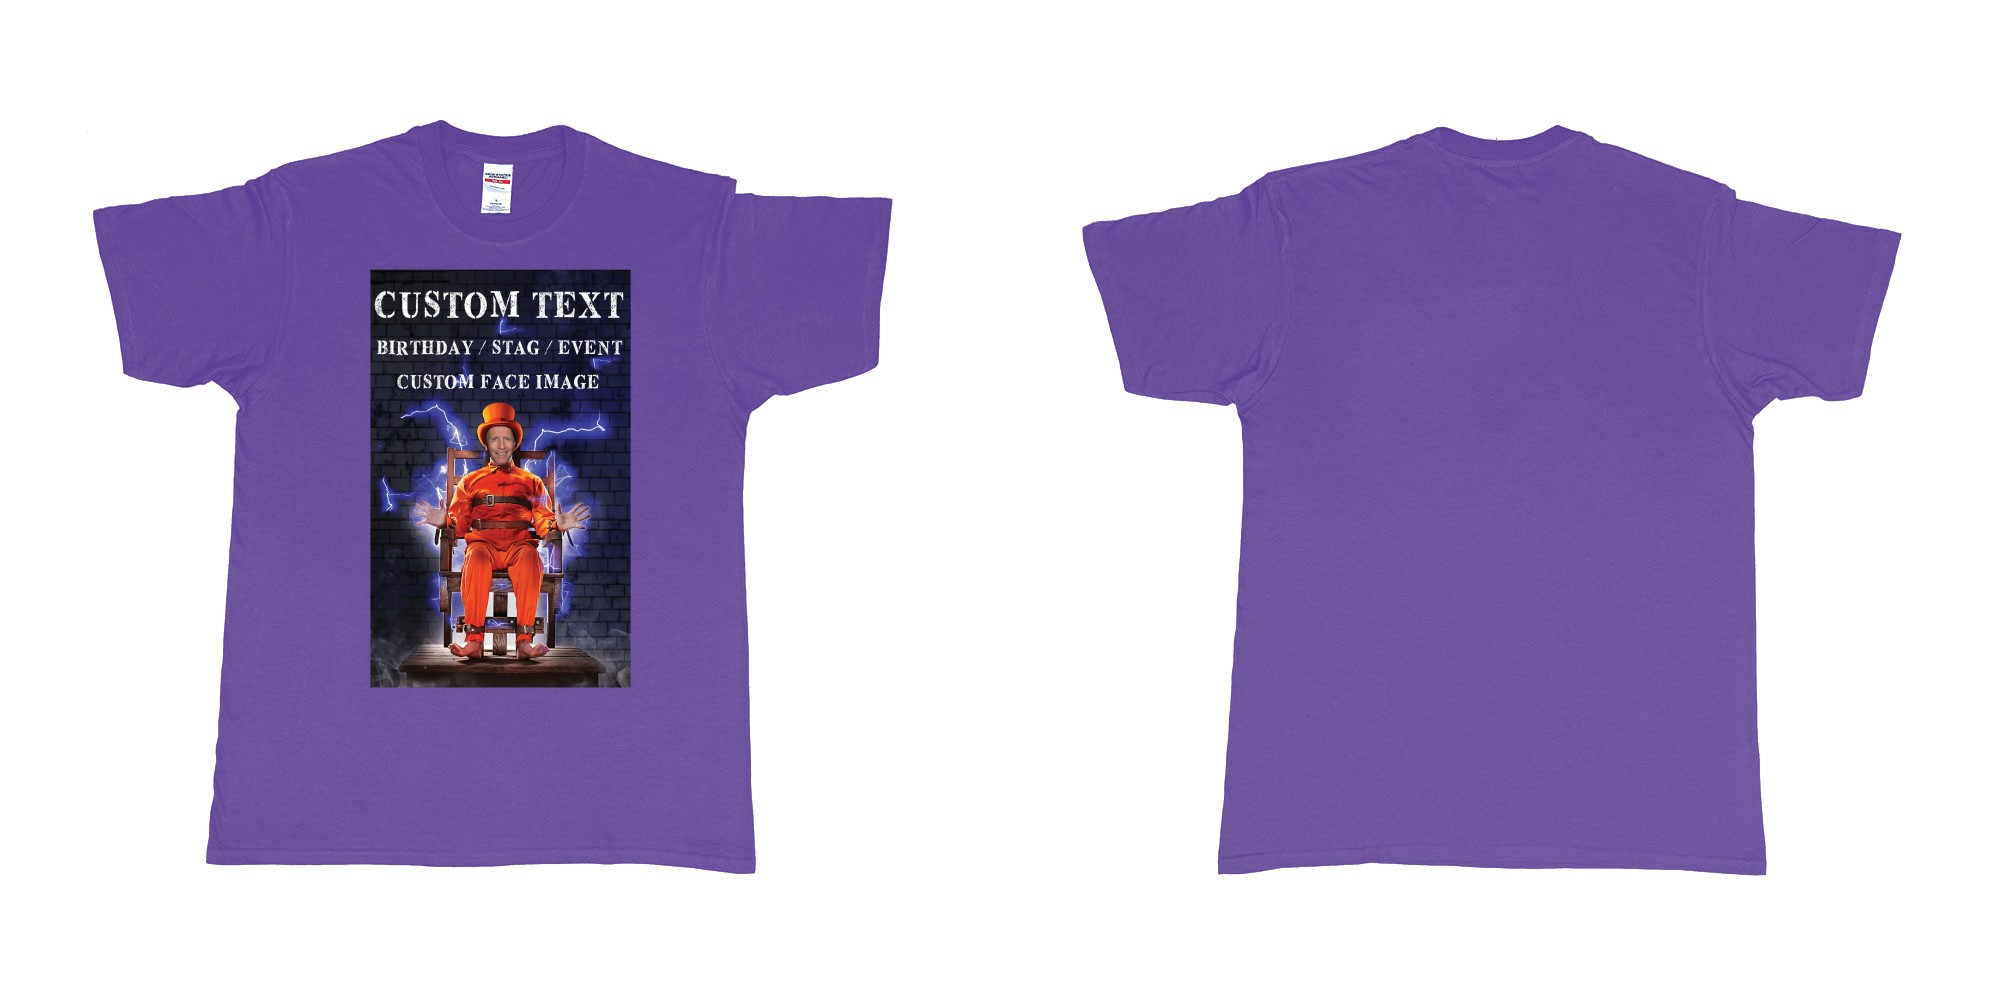 Custom tshirt design stevo guilty as charged custom face image electric chair in fabric color purple choice your own text made in Bali by The Pirate Way